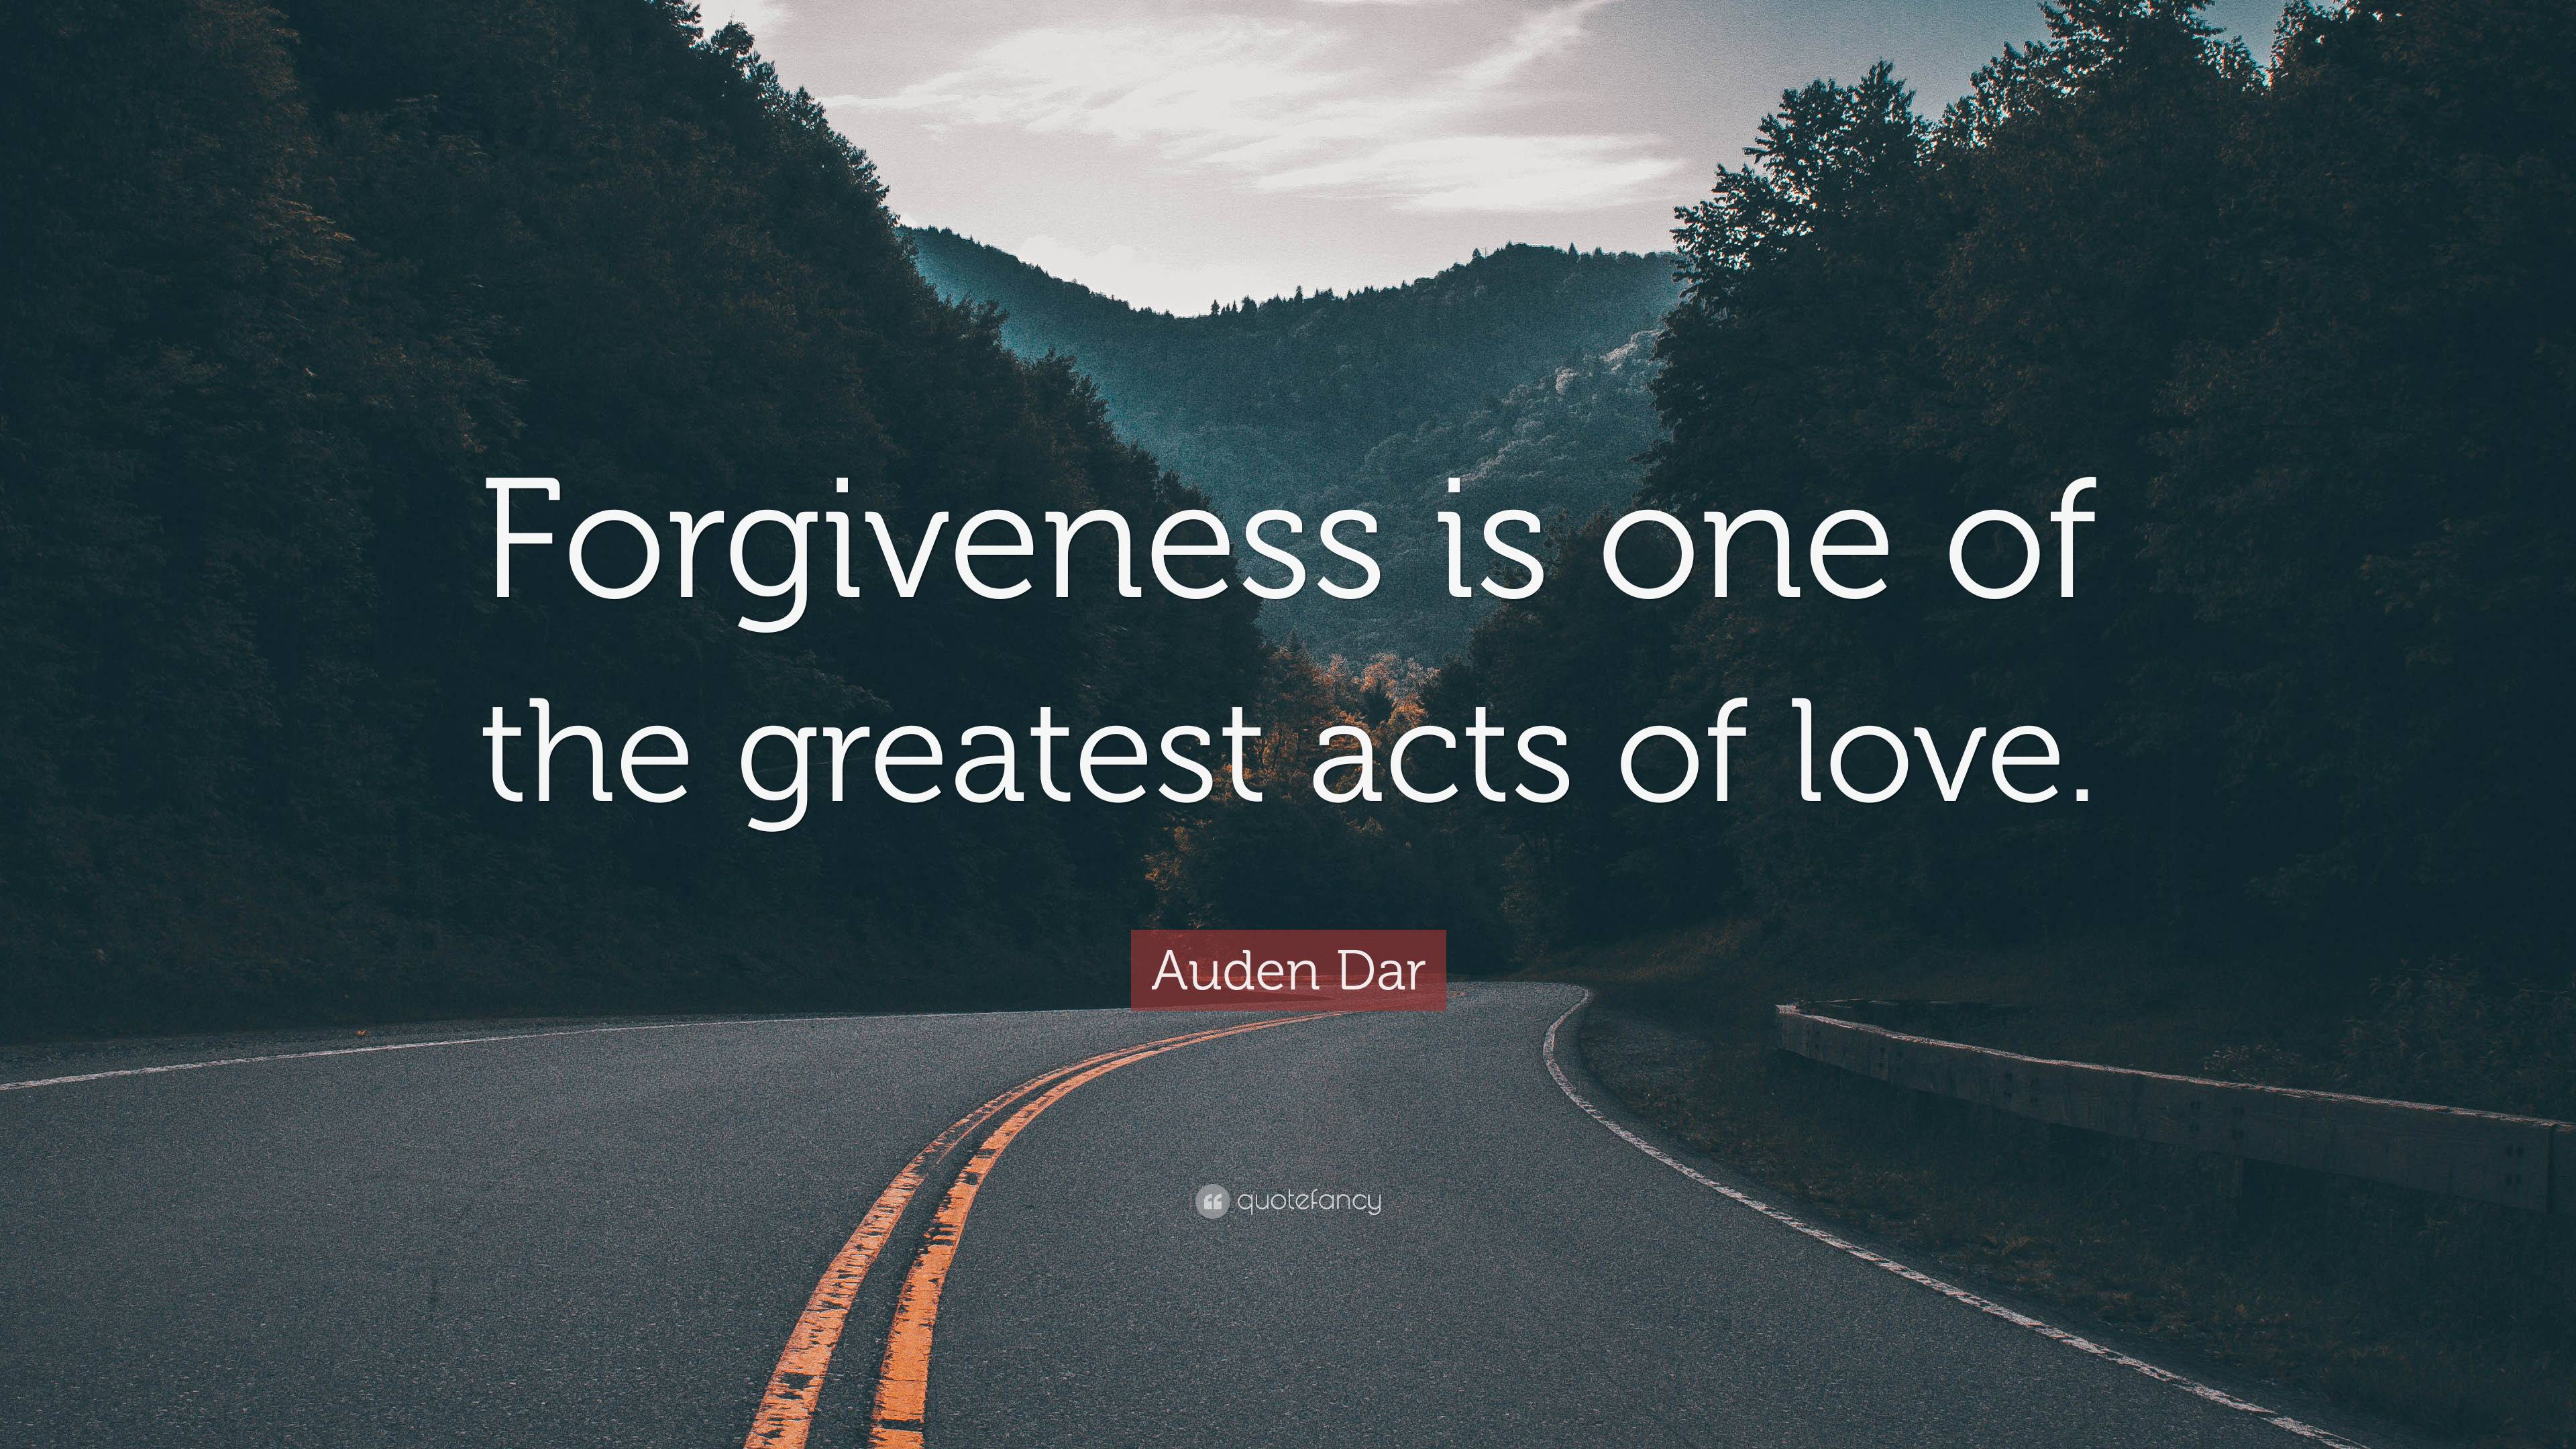 Auden Dar Quote: “Forgiveness is one of the greatest acts of love.”